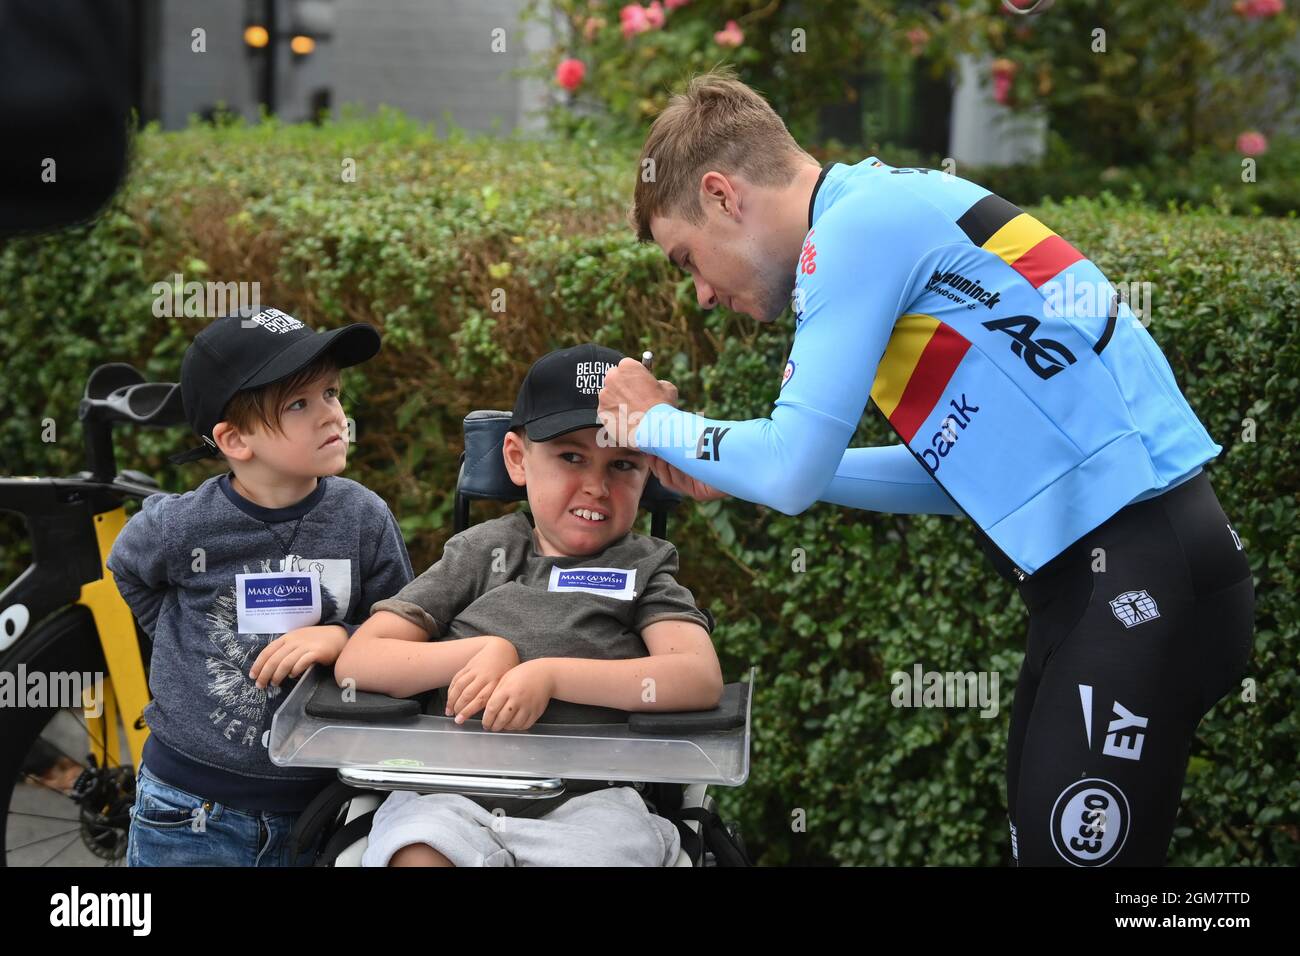 Belgian Remco Evenepoel of Deceuninck - Quick-Step pictured during a meet and greet for Make a Wish foundation with Noah and Skay Wenselaers ahead of Stock Photo